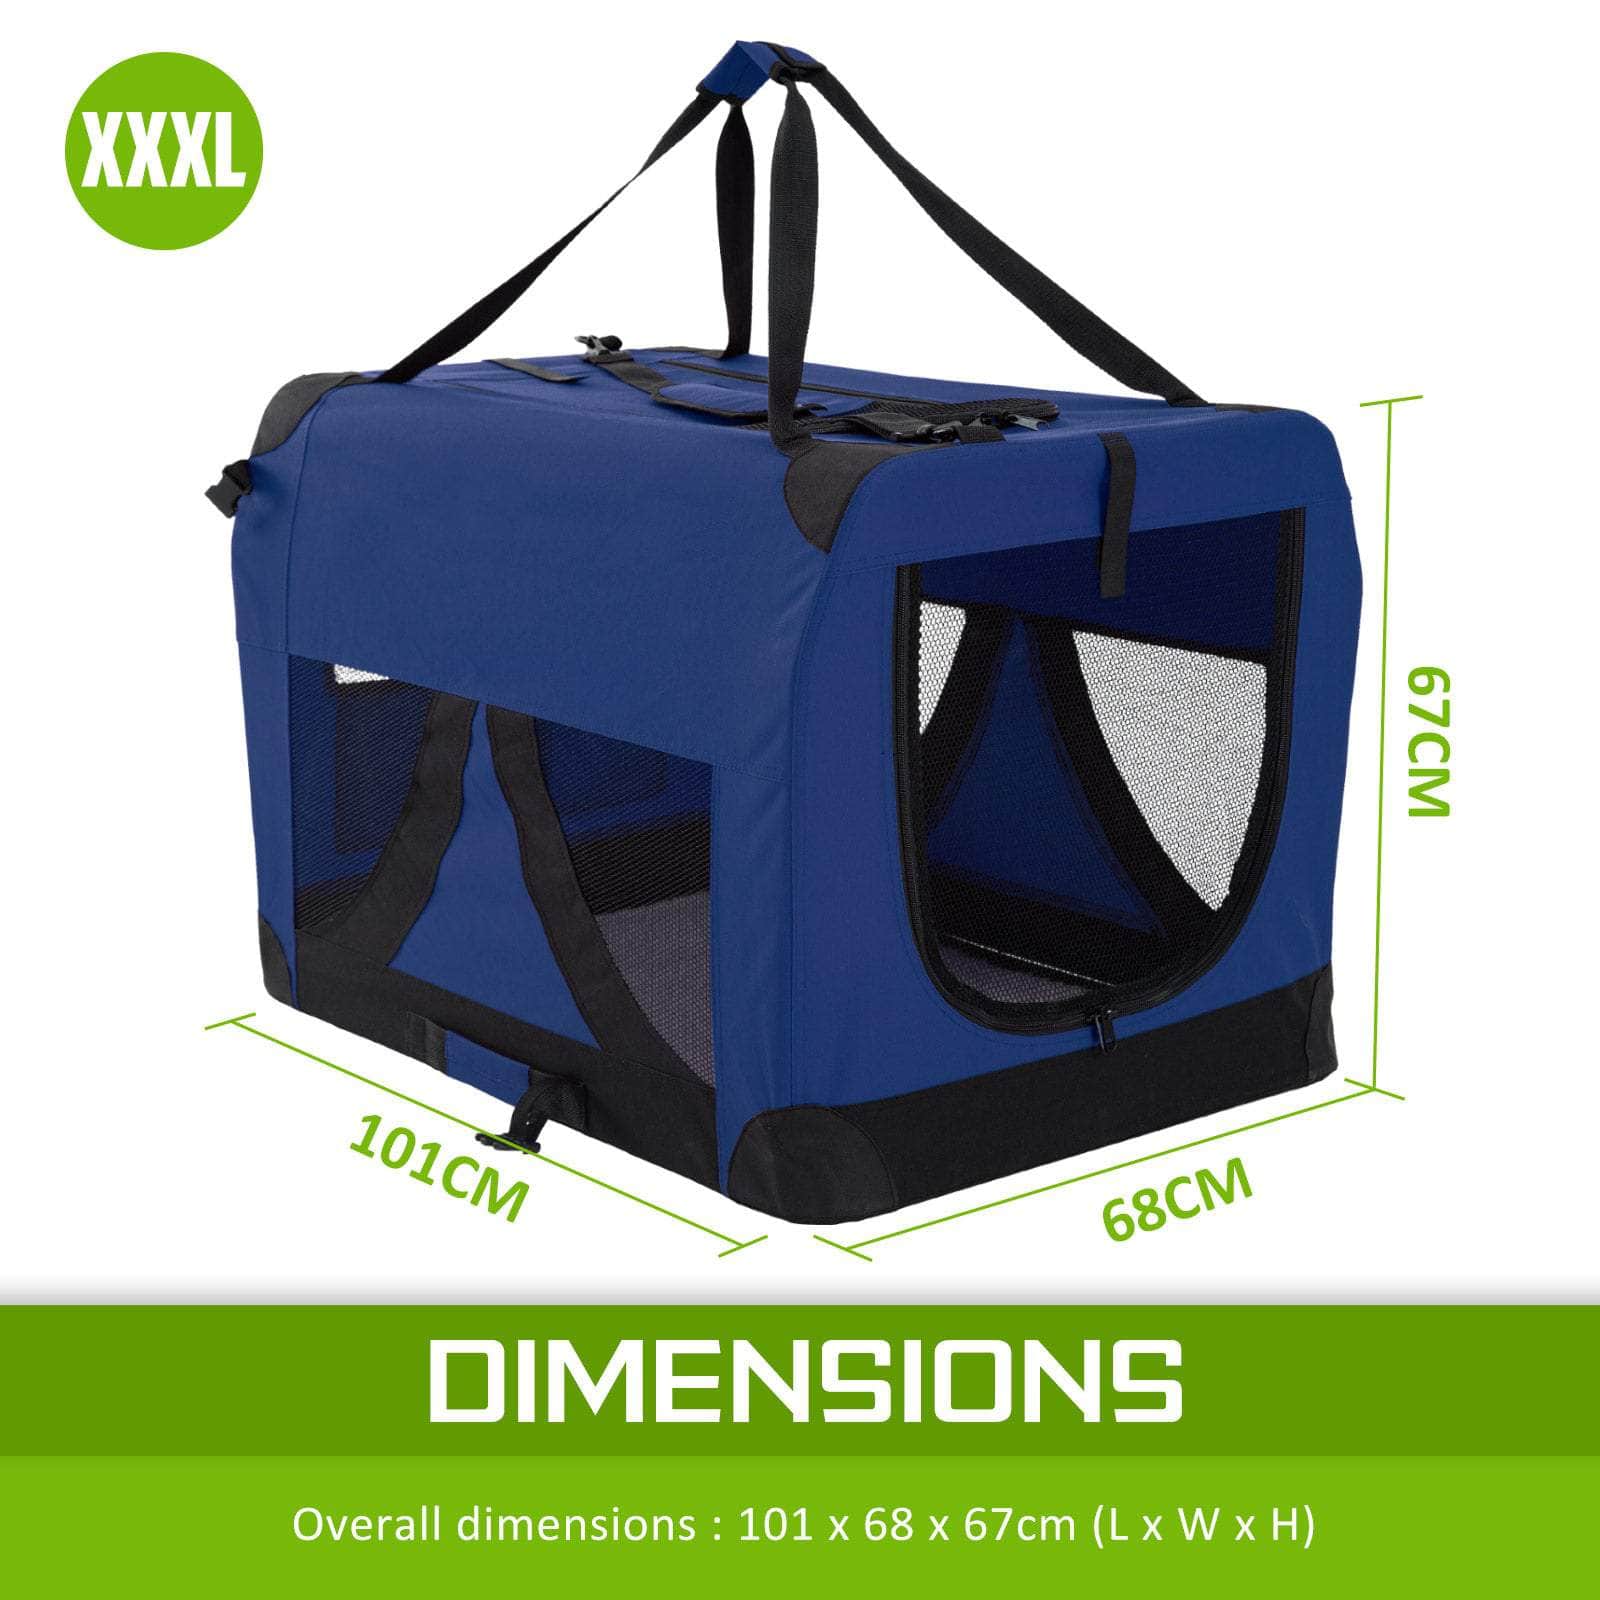 Blue Portable Soft Dog Cage Crate Carrier Xxxl